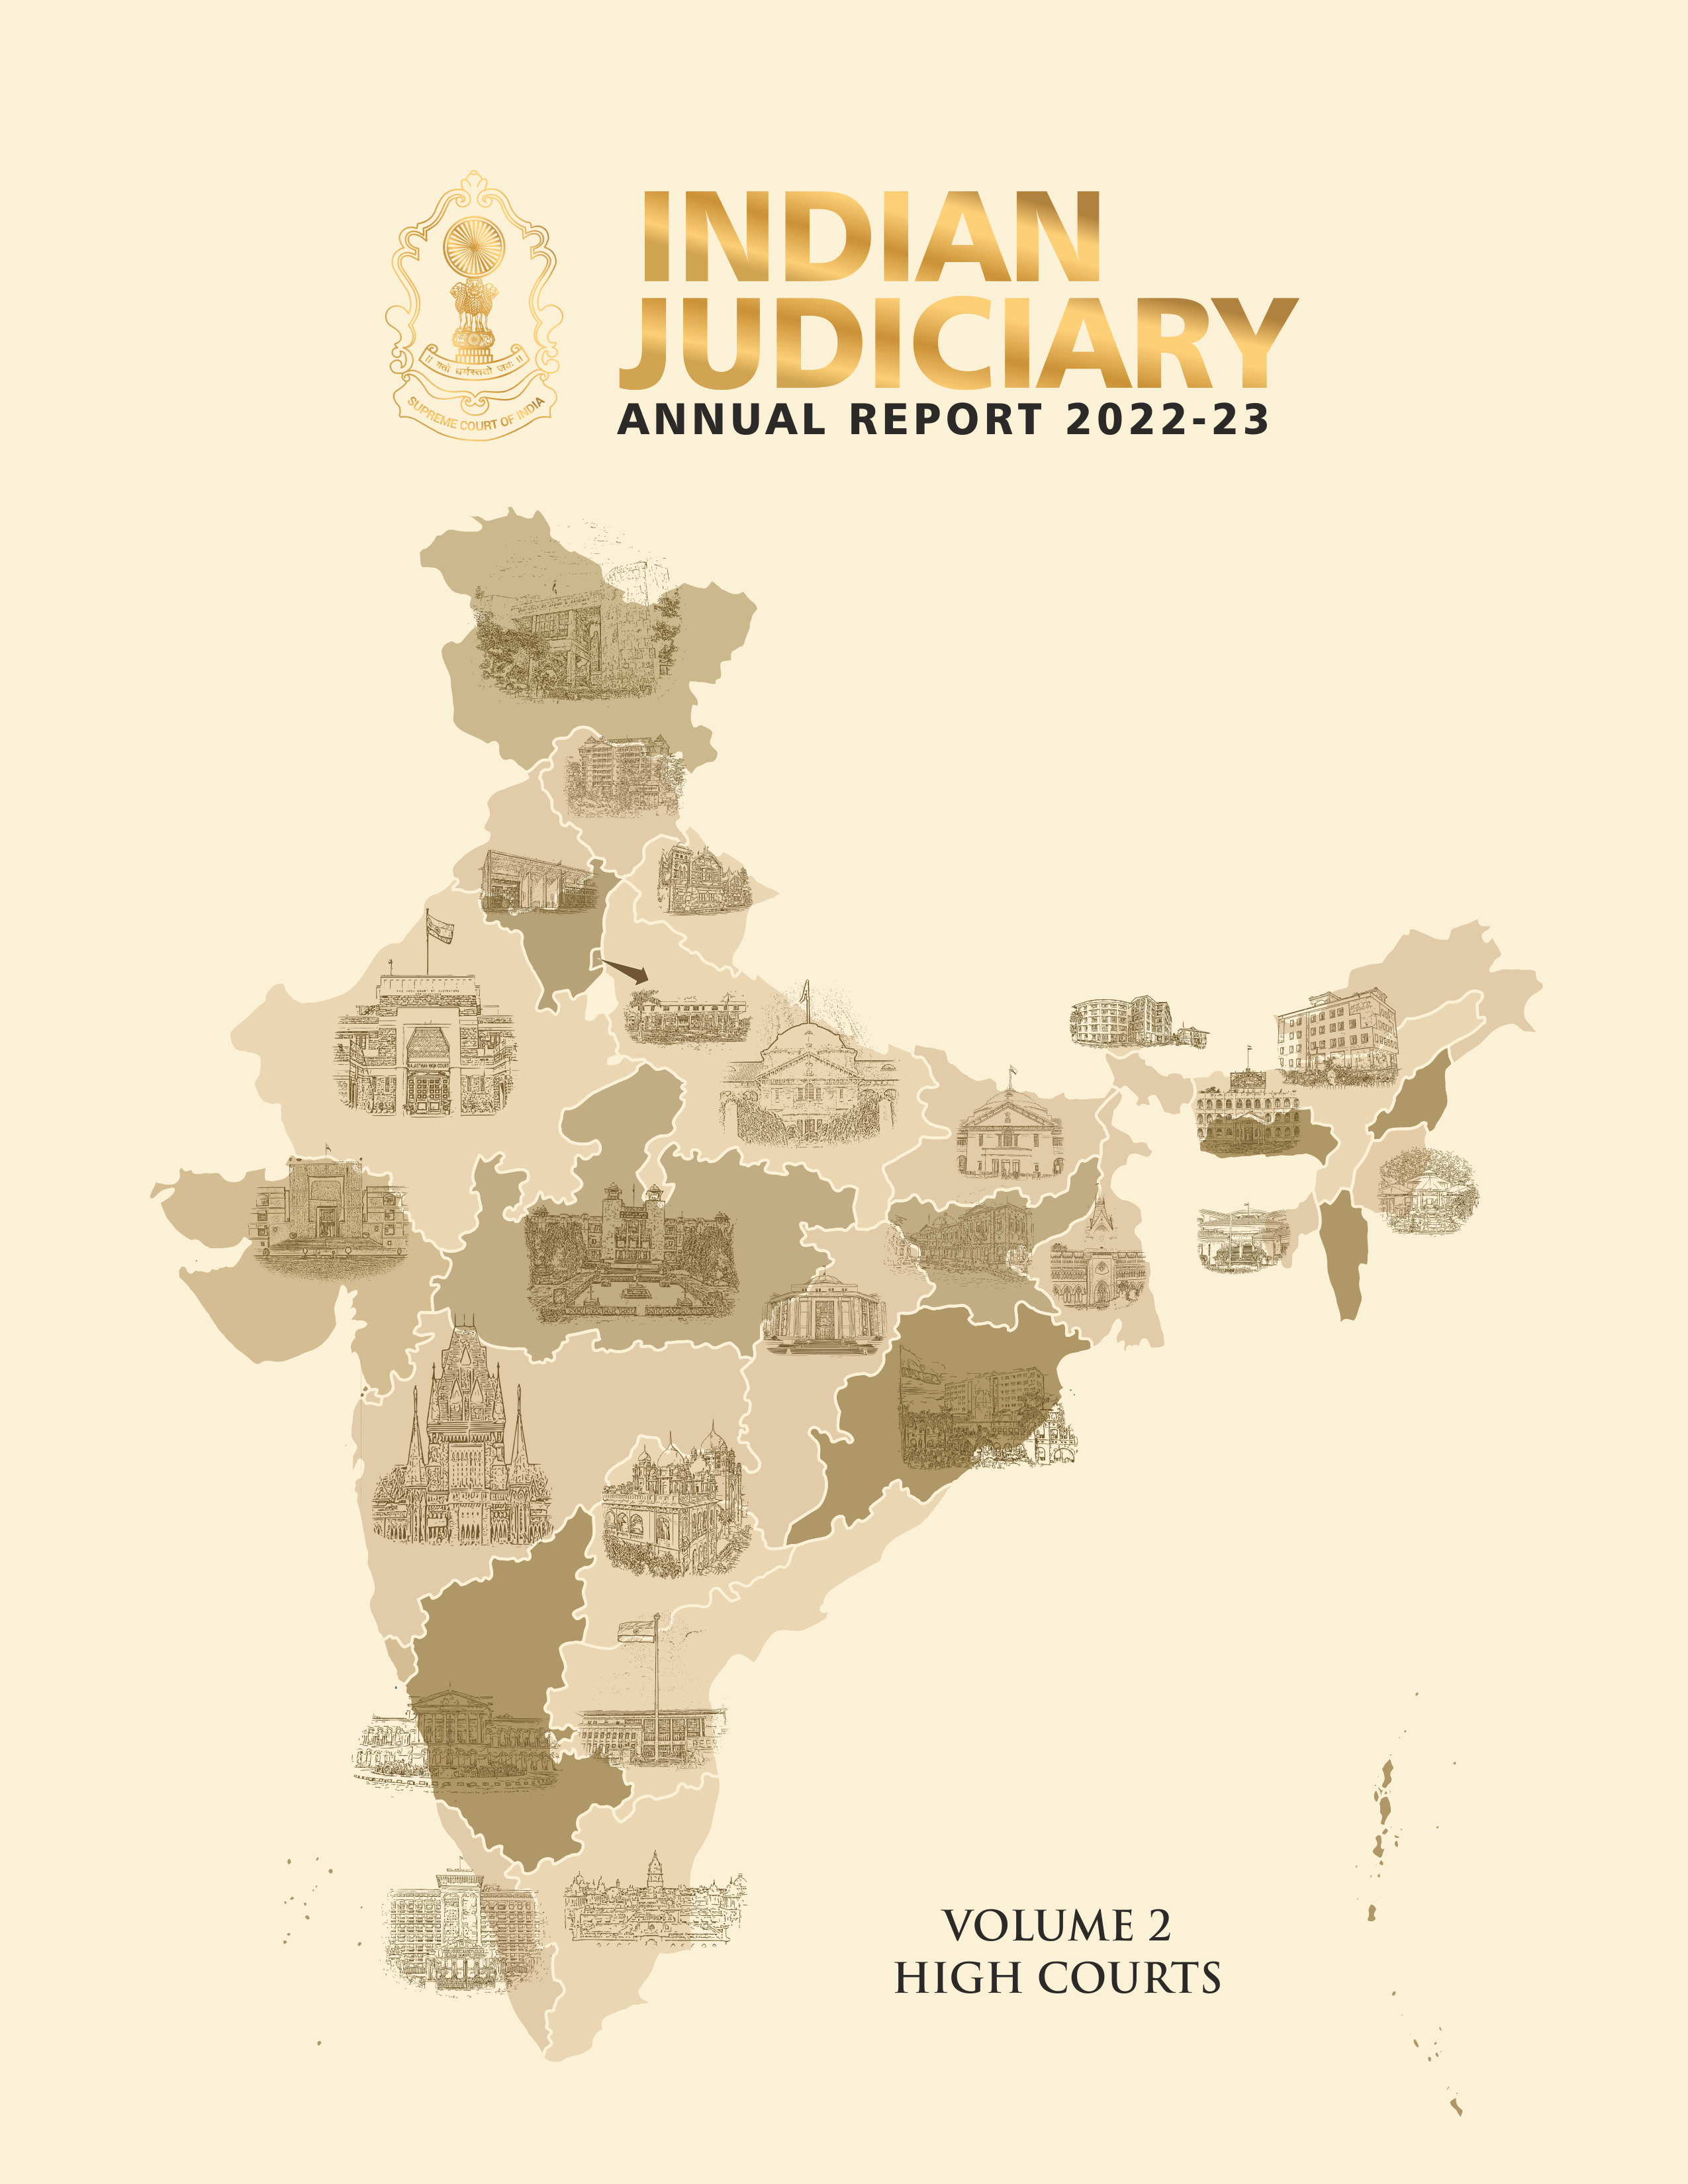 High Court cover image